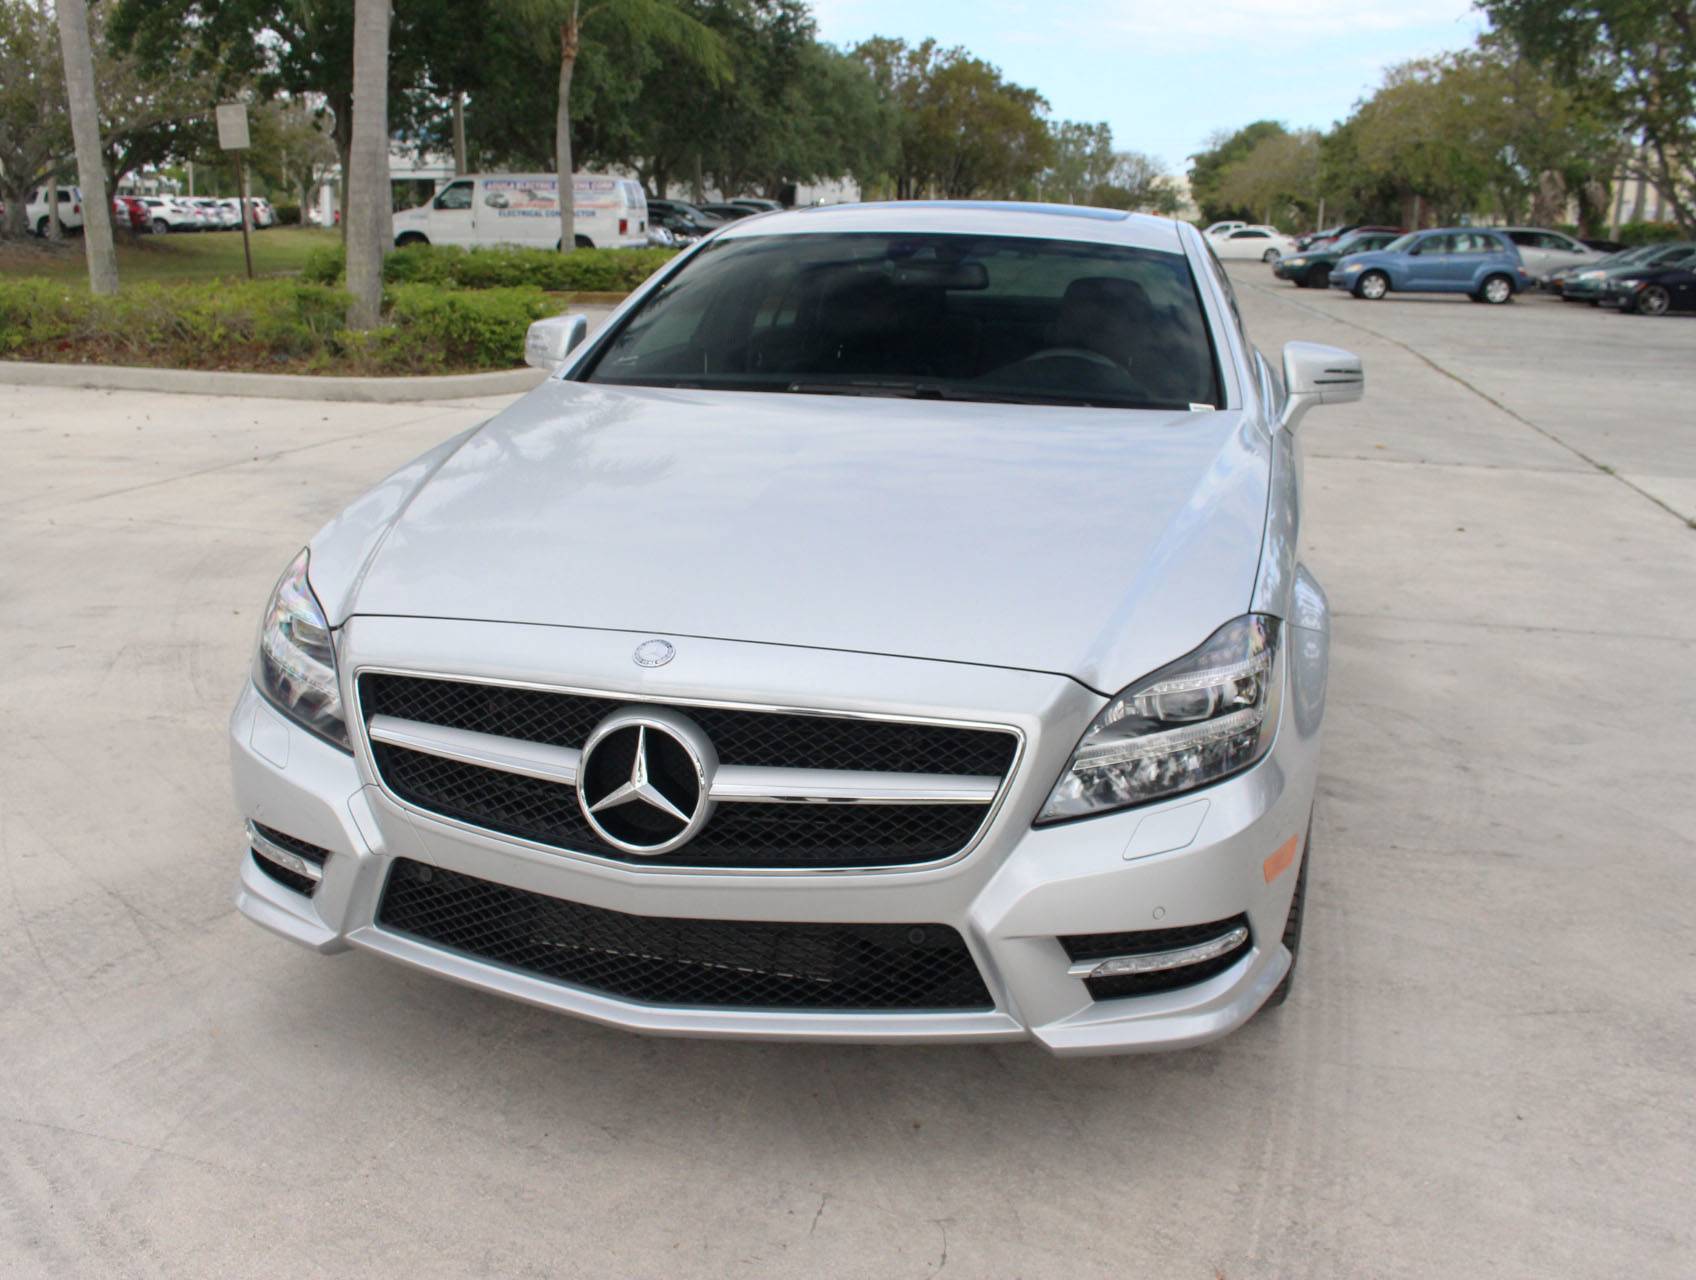 Florida Fine Cars - Used MERCEDES-BENZ CLS CLASS 2014 MARGATE CLS550